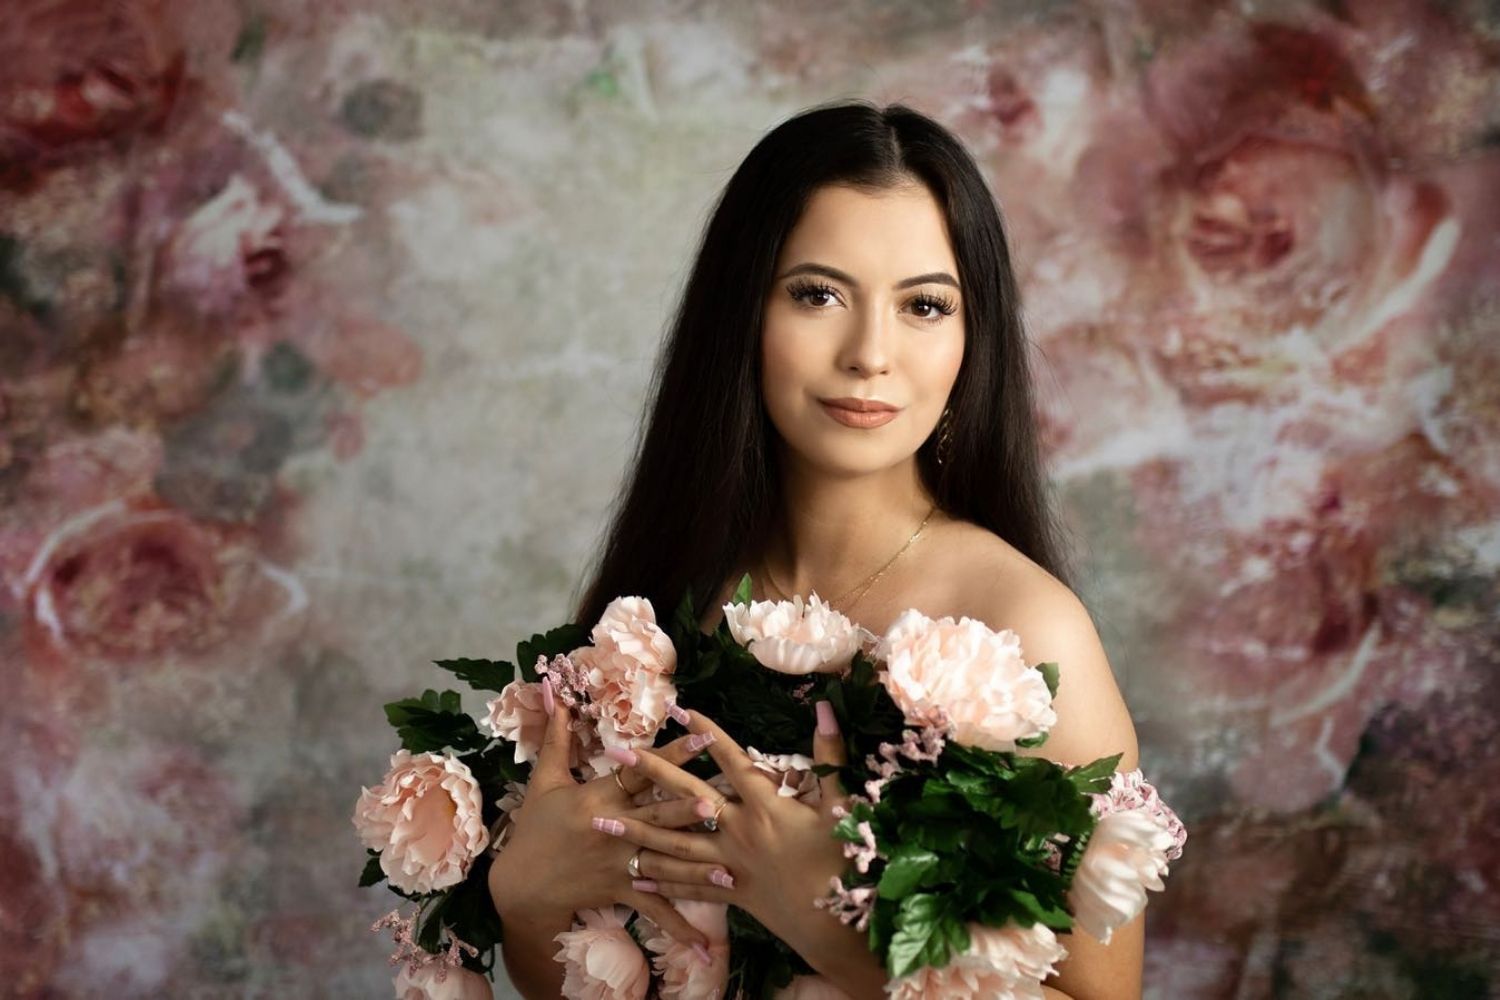 woman's photo with Kate Oil Painting Flowers Backdrop Vintage Hand Painted Texture Designed by GQ